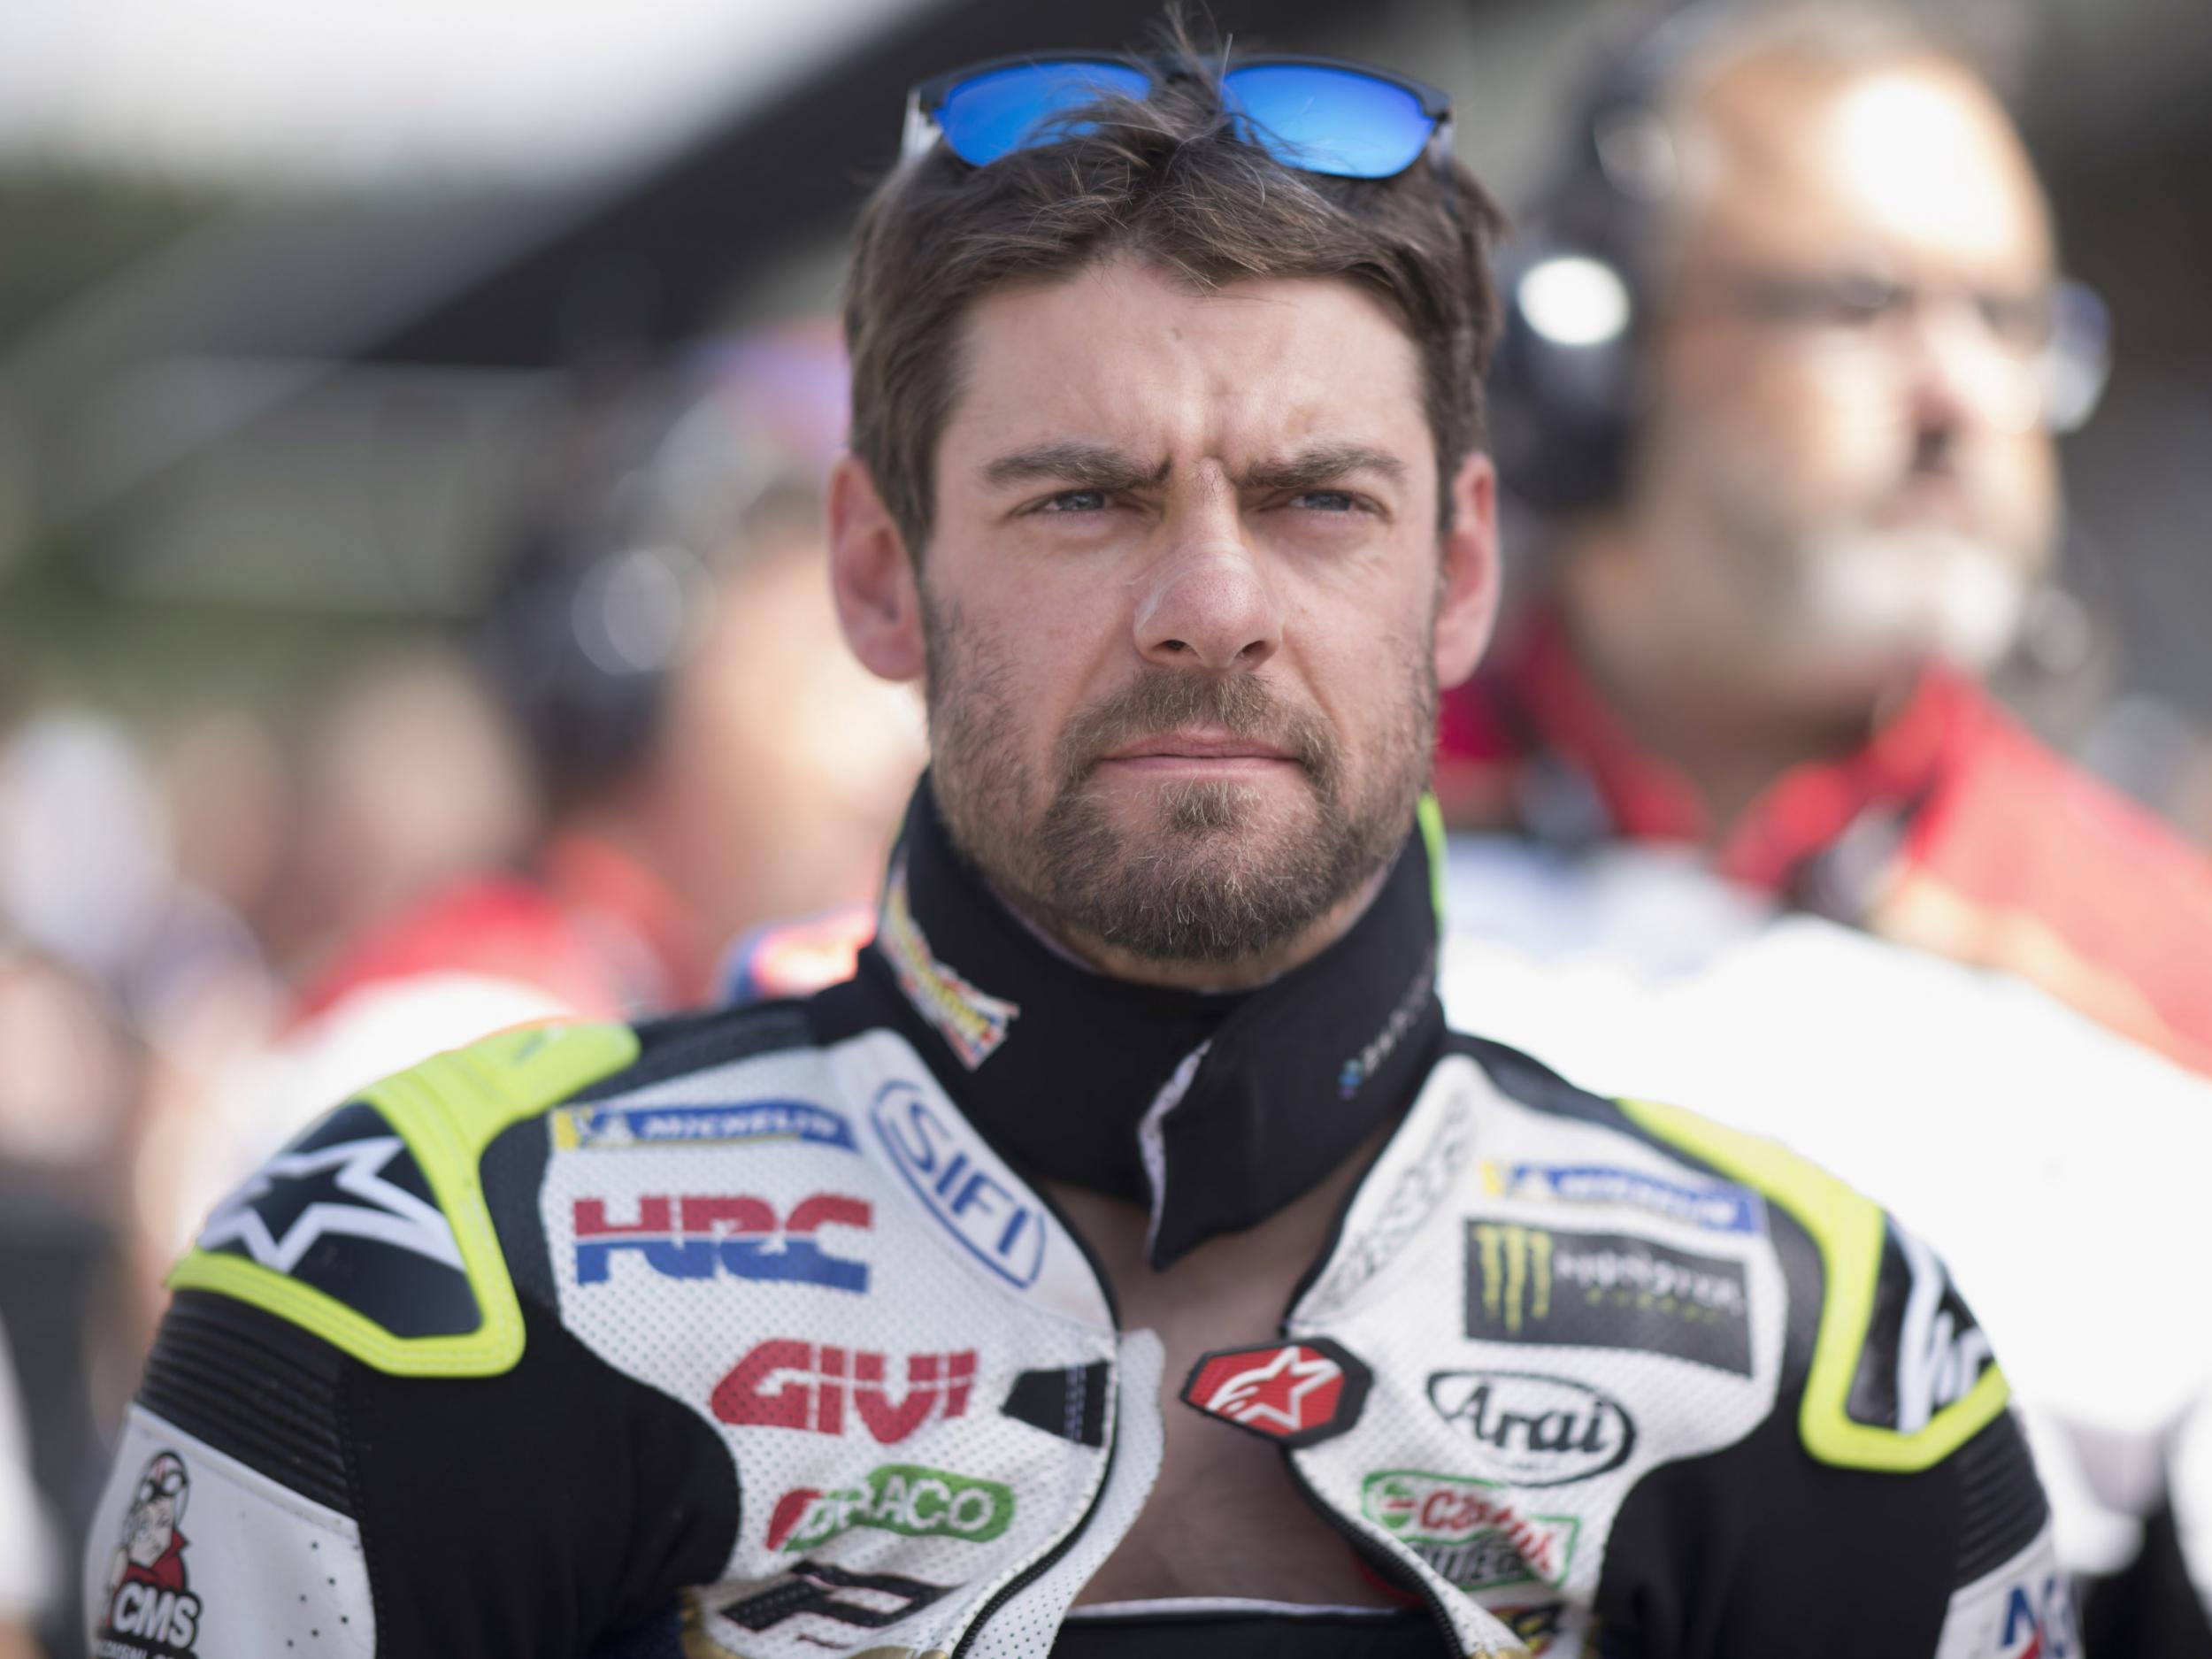 Crutchlow is hoping to become the first British winner since the inaugural race in 1977